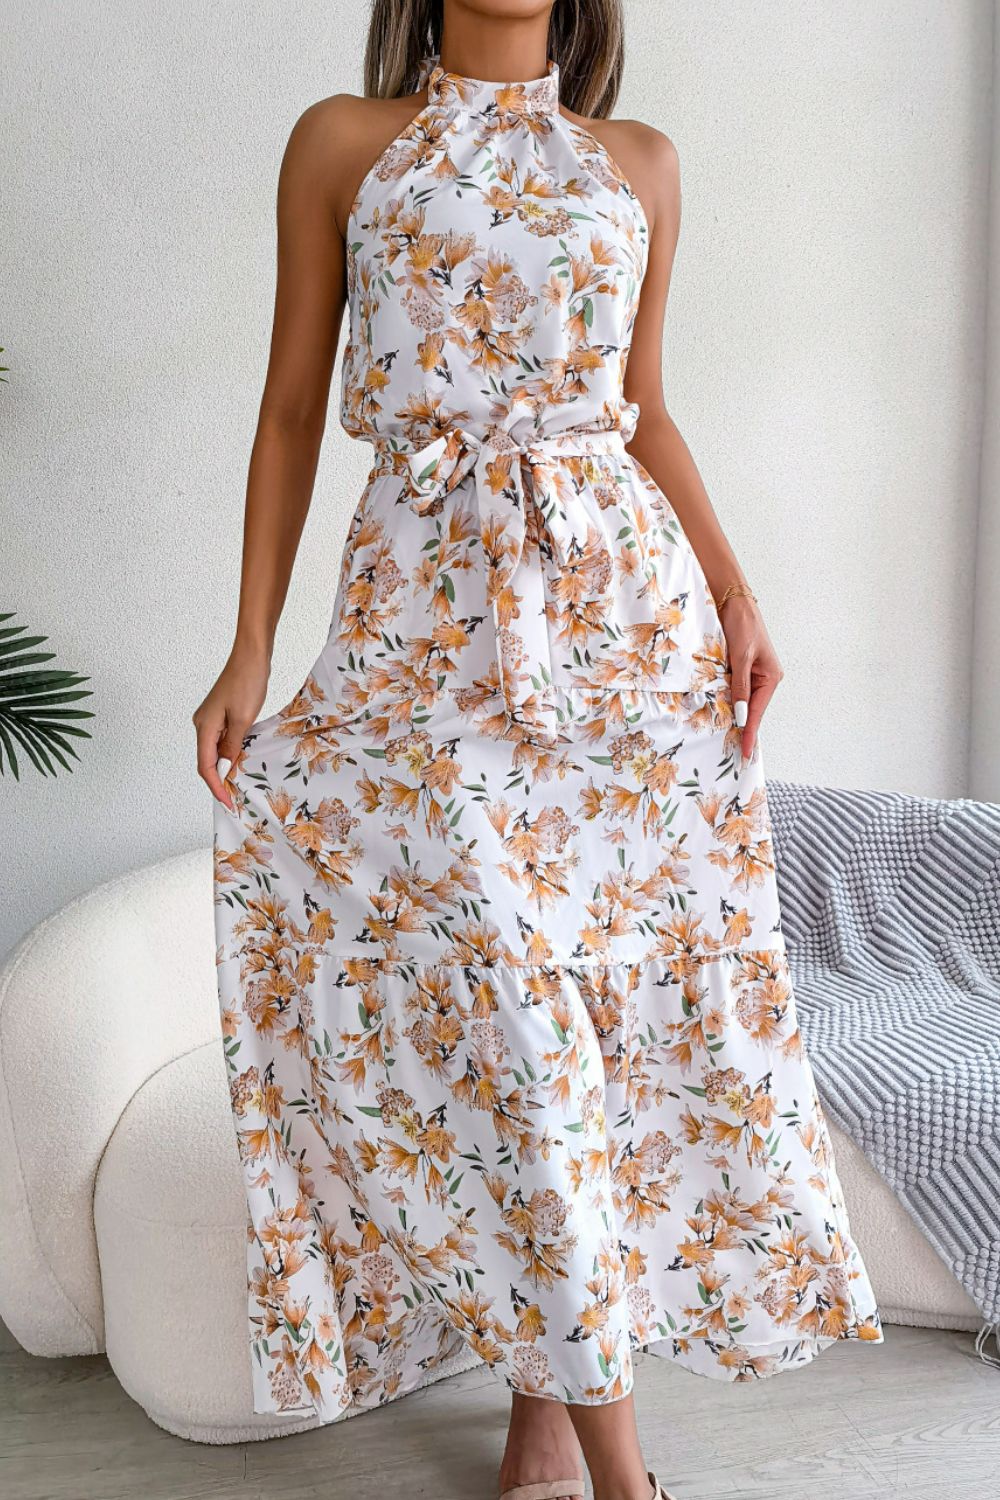 Floral Tie Waist Backless Maxi Dress - Bakers Shoes store